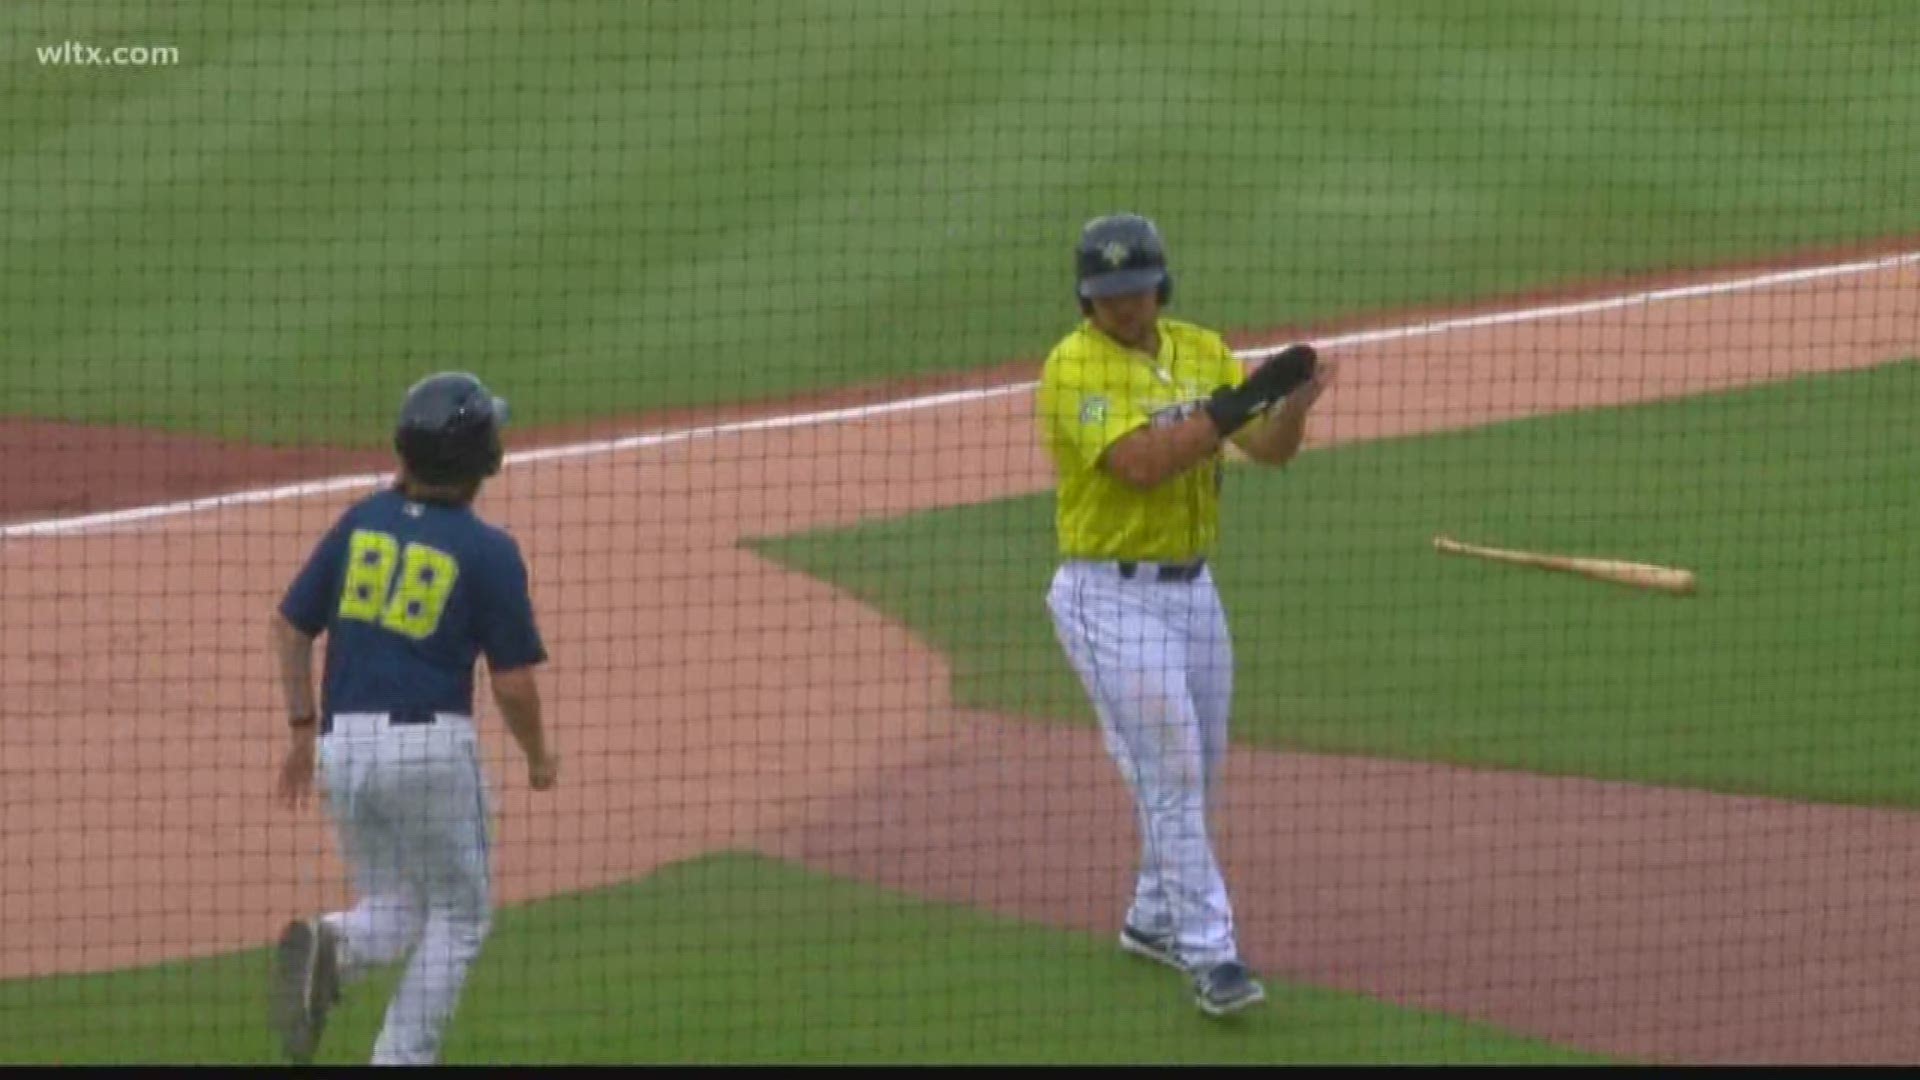 The Fireflies get their first win in a week with an emphatic 8-1 victory over the Asheville Tourists.